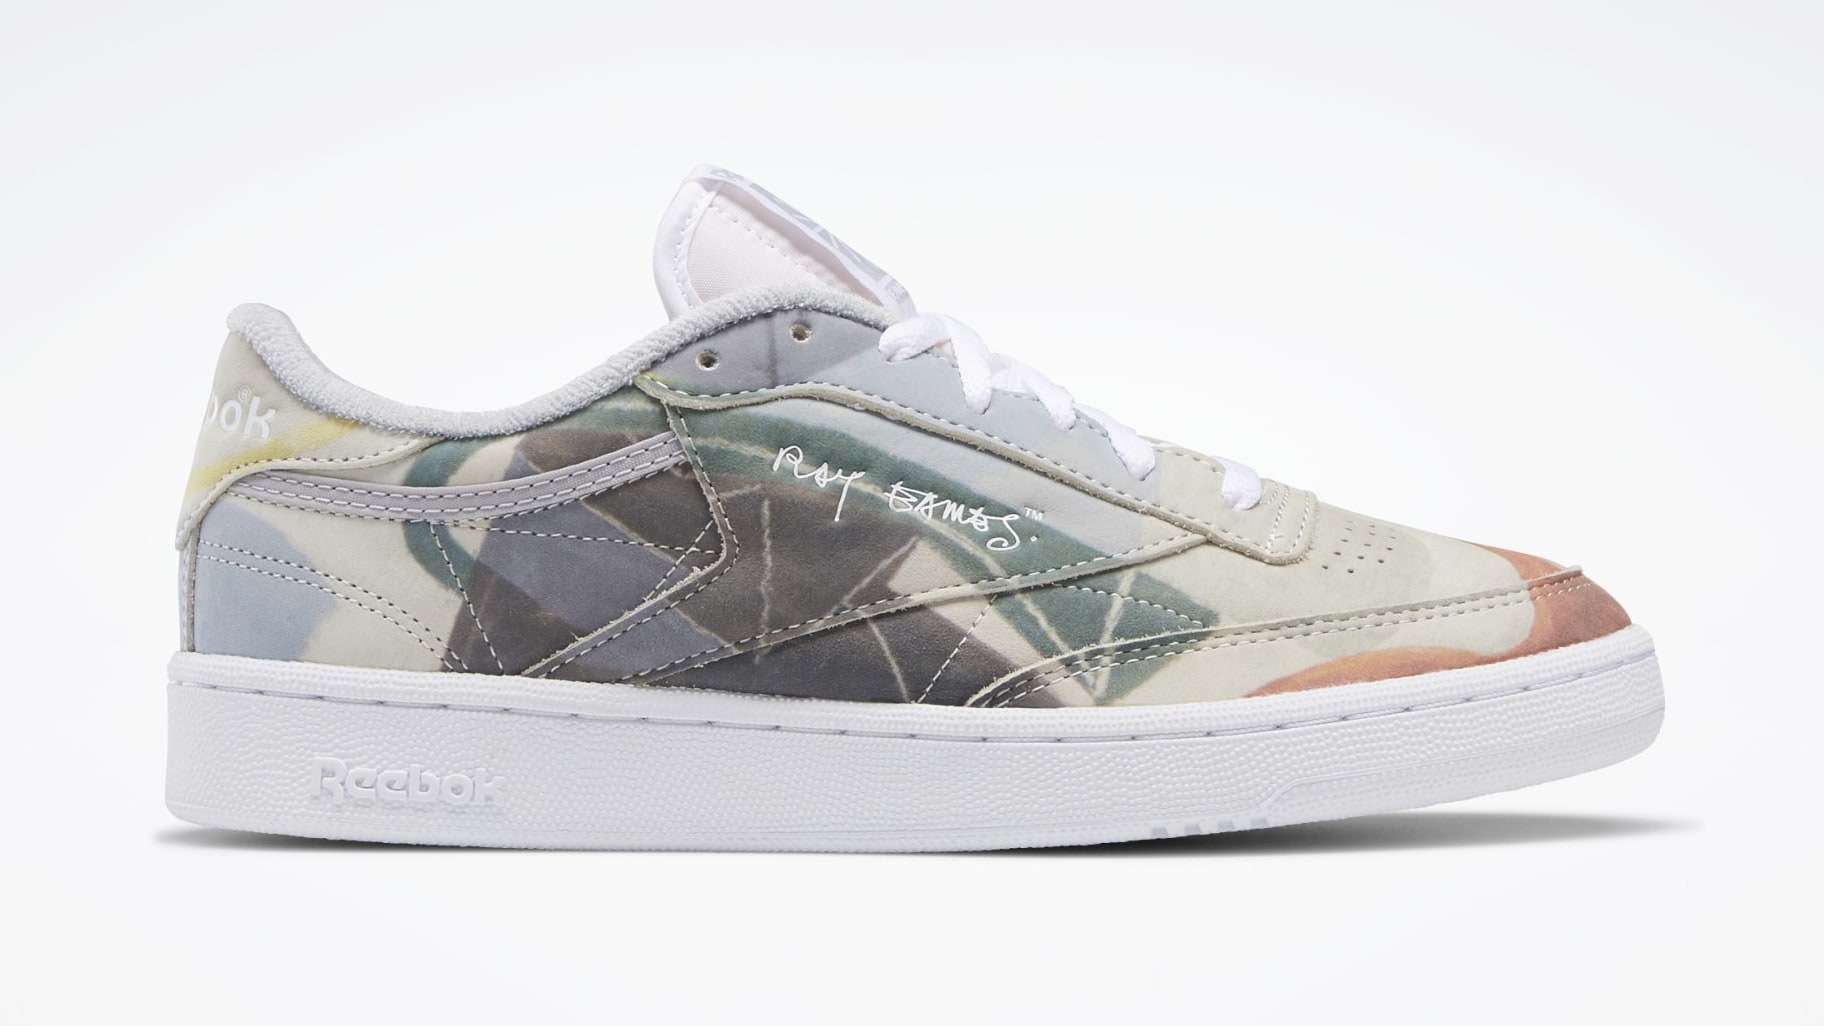 Eames x Reebok Club C 'Composition' GY1068 Lateral